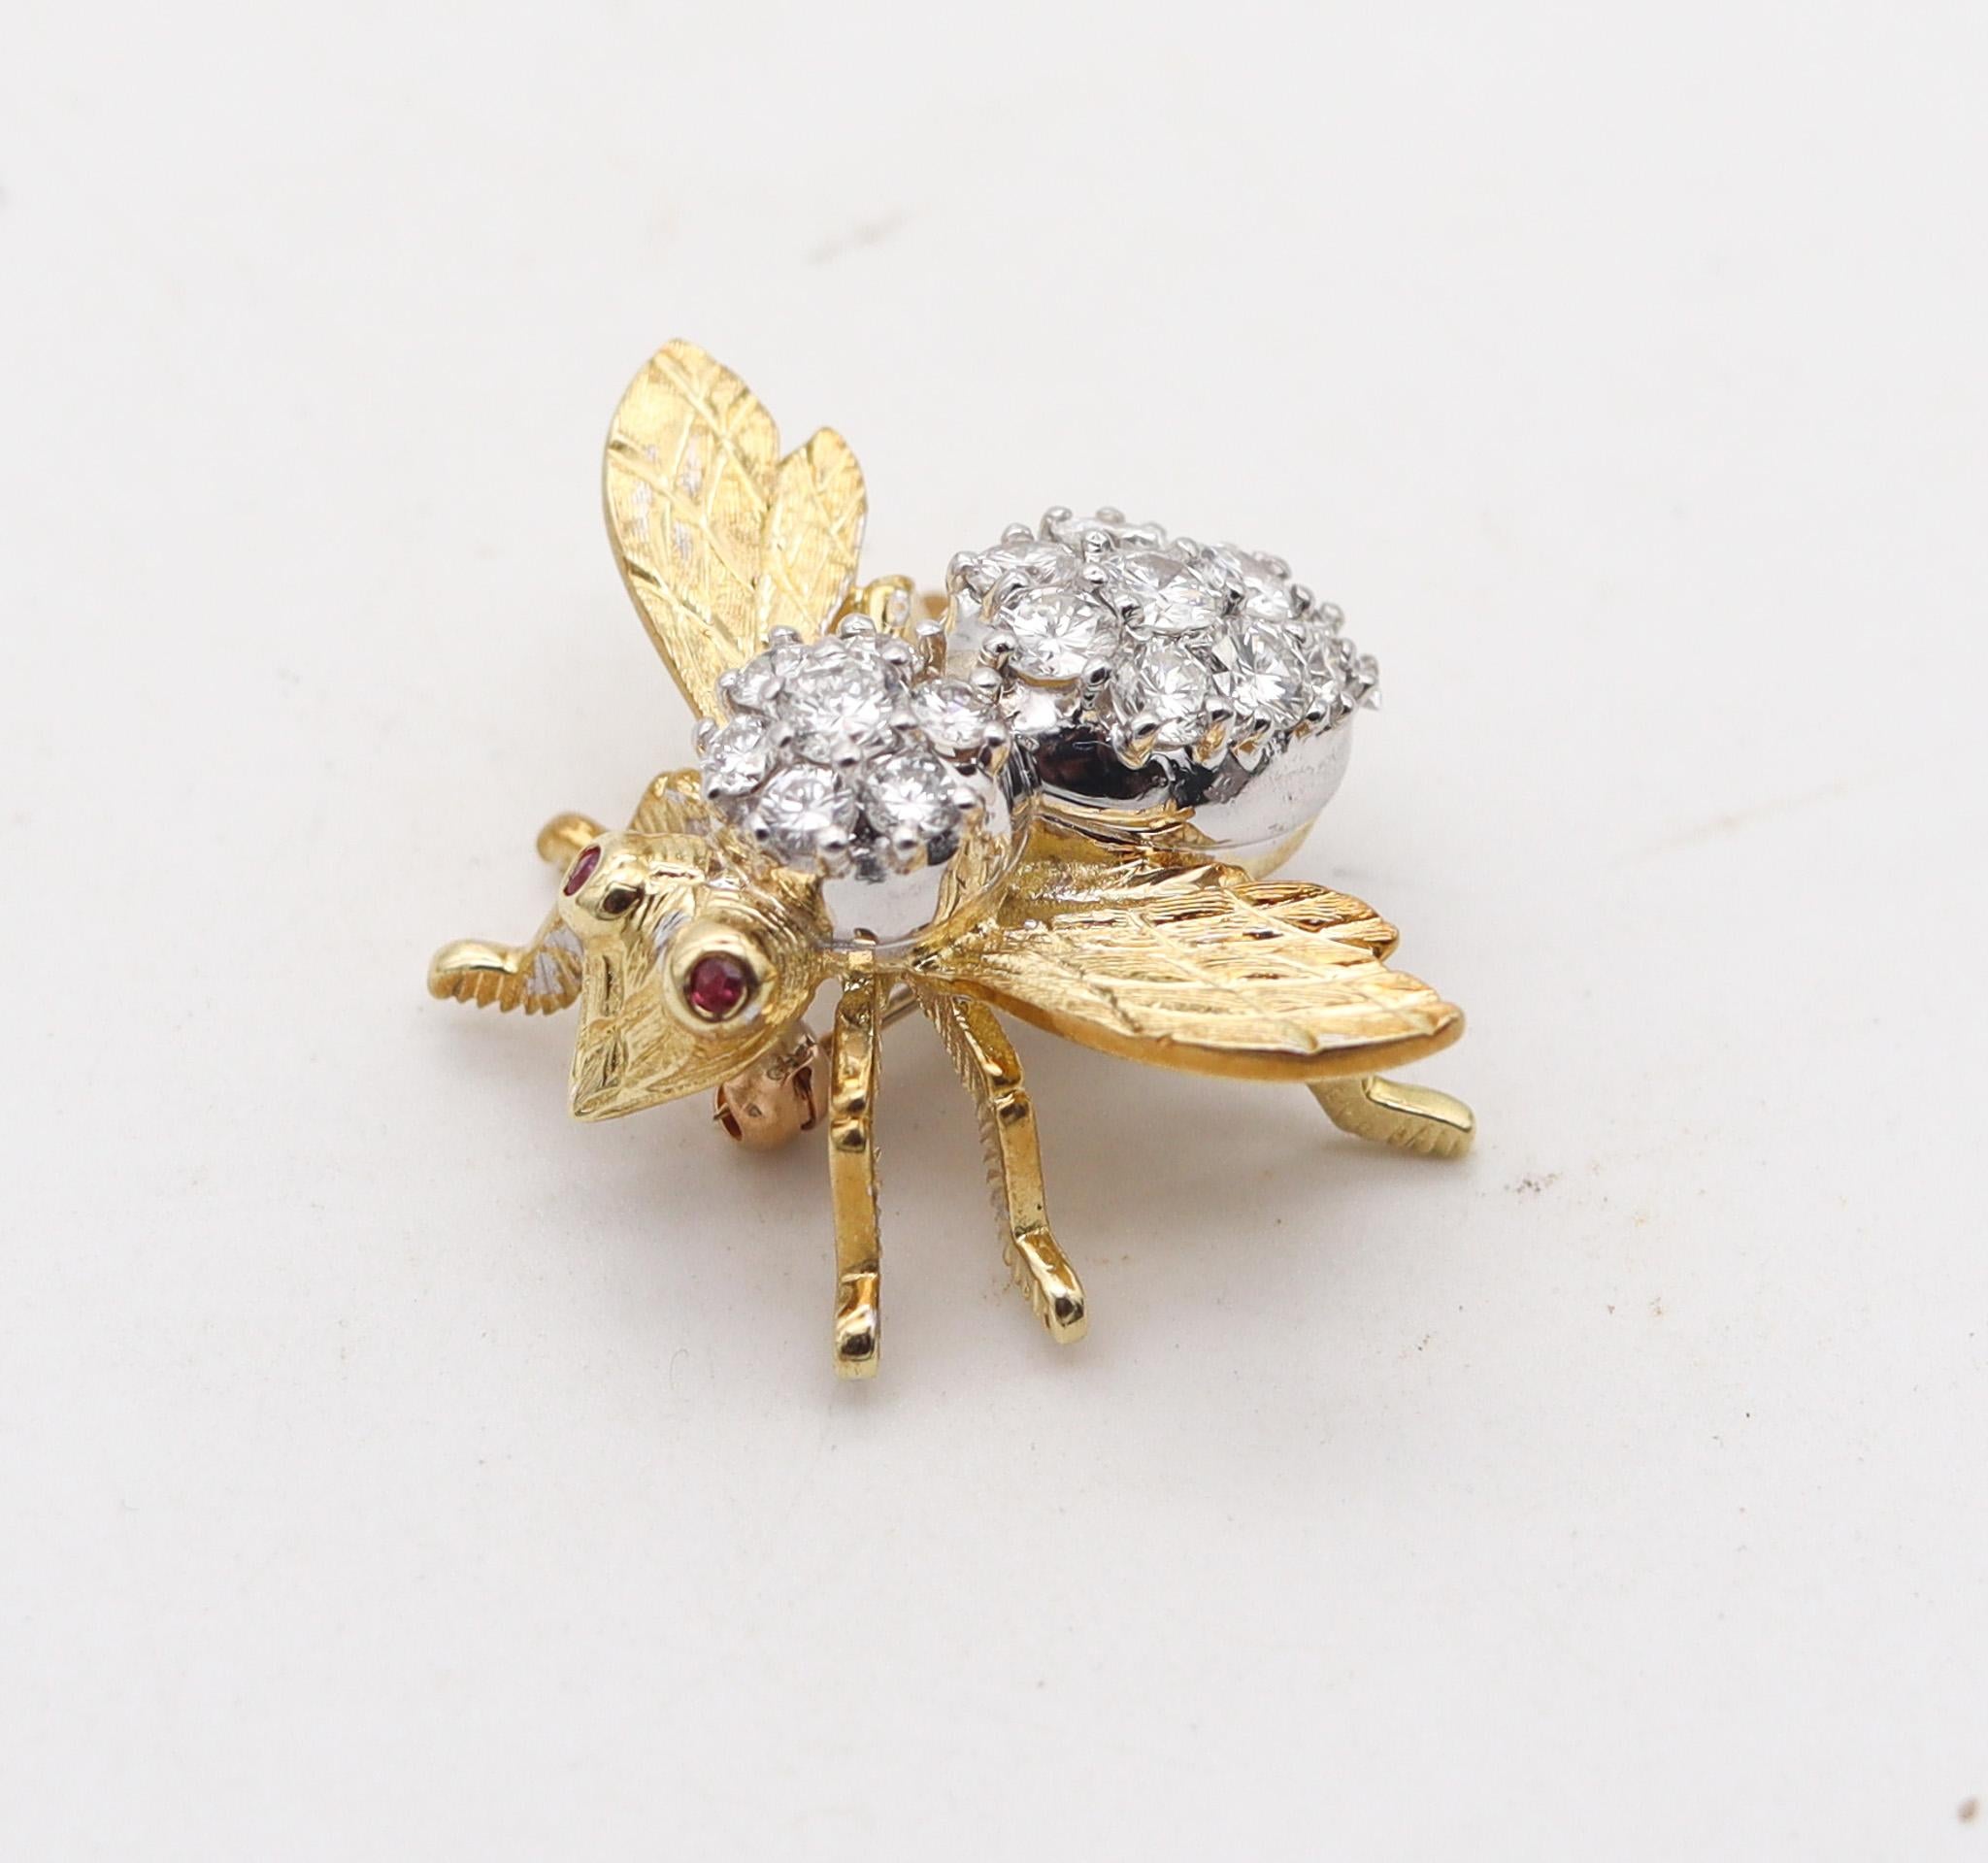 Large bee pin-brooch designed by Herbert Rosenthal.

Herbert Rosenthal's fame in the jewelry world sprung from the creation of insect and animal motifs, particularly bee brooches. This exceptional brooch pin of a queen-bee is one of them. Created at